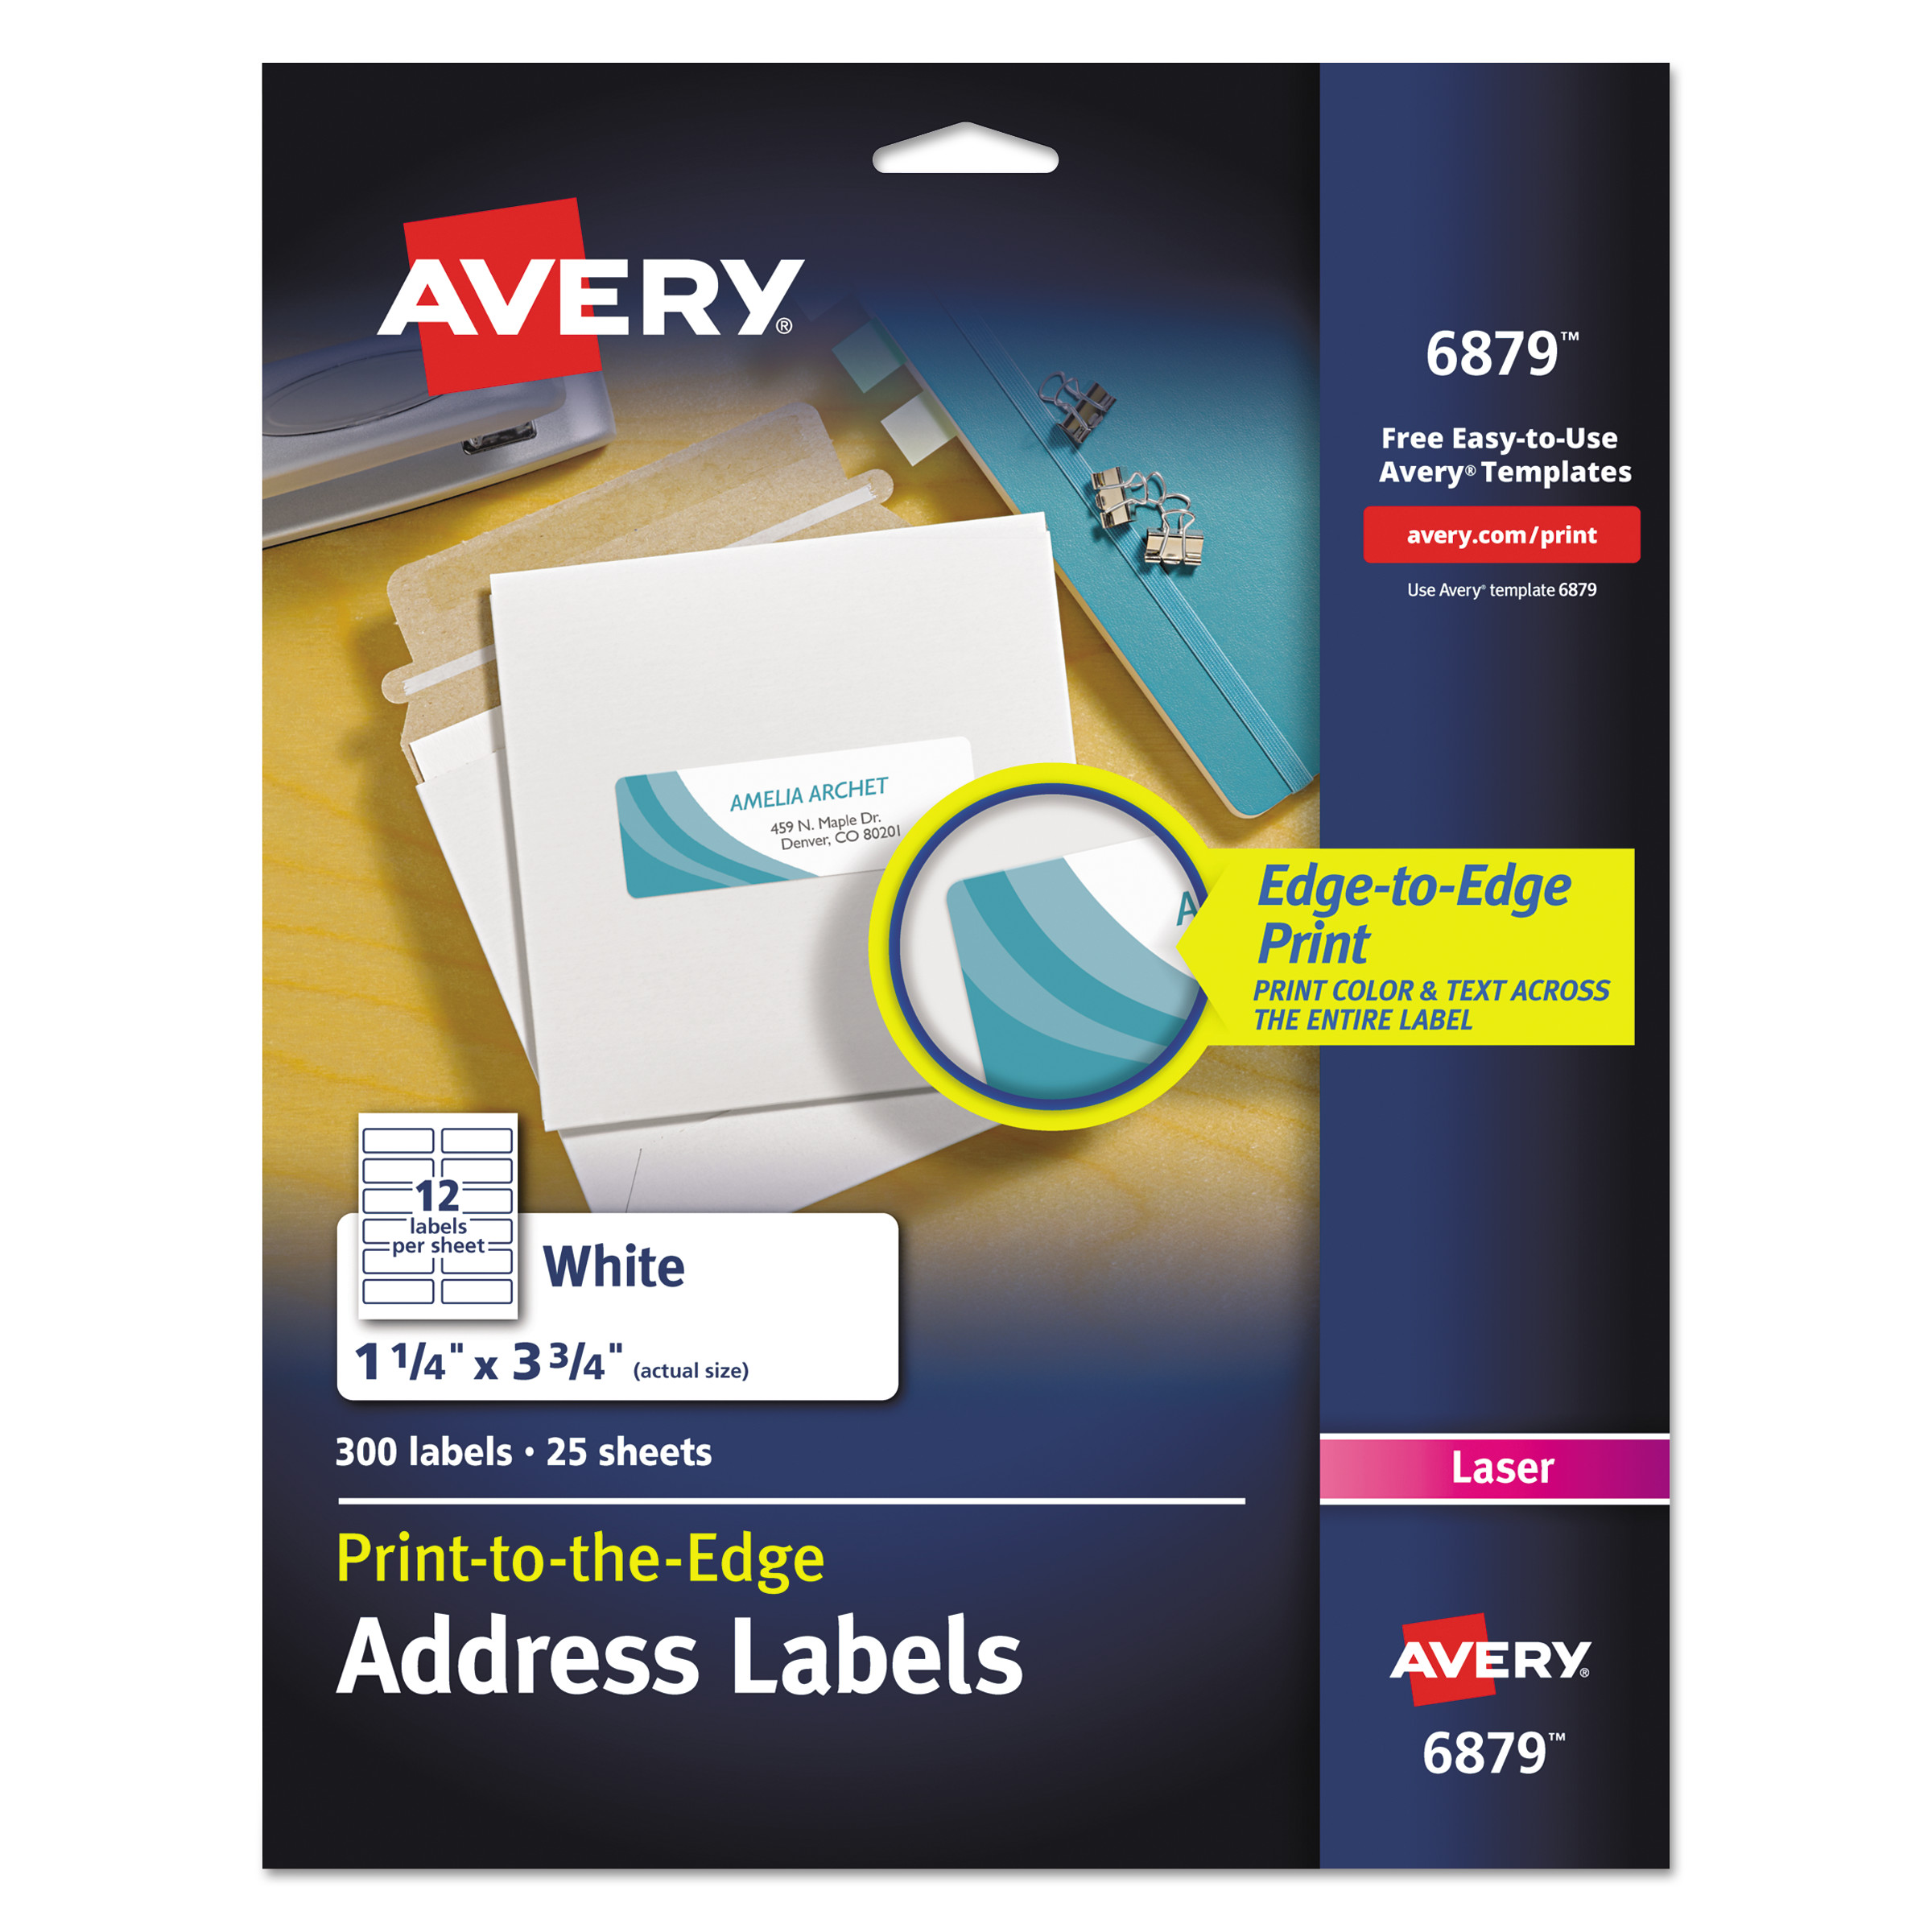  Avery 06879 Vibrant Laser Color-Print Labels with Sure Feed, 1 1/4 x 3 3/4, White, 300/Pack (AVE6879) 